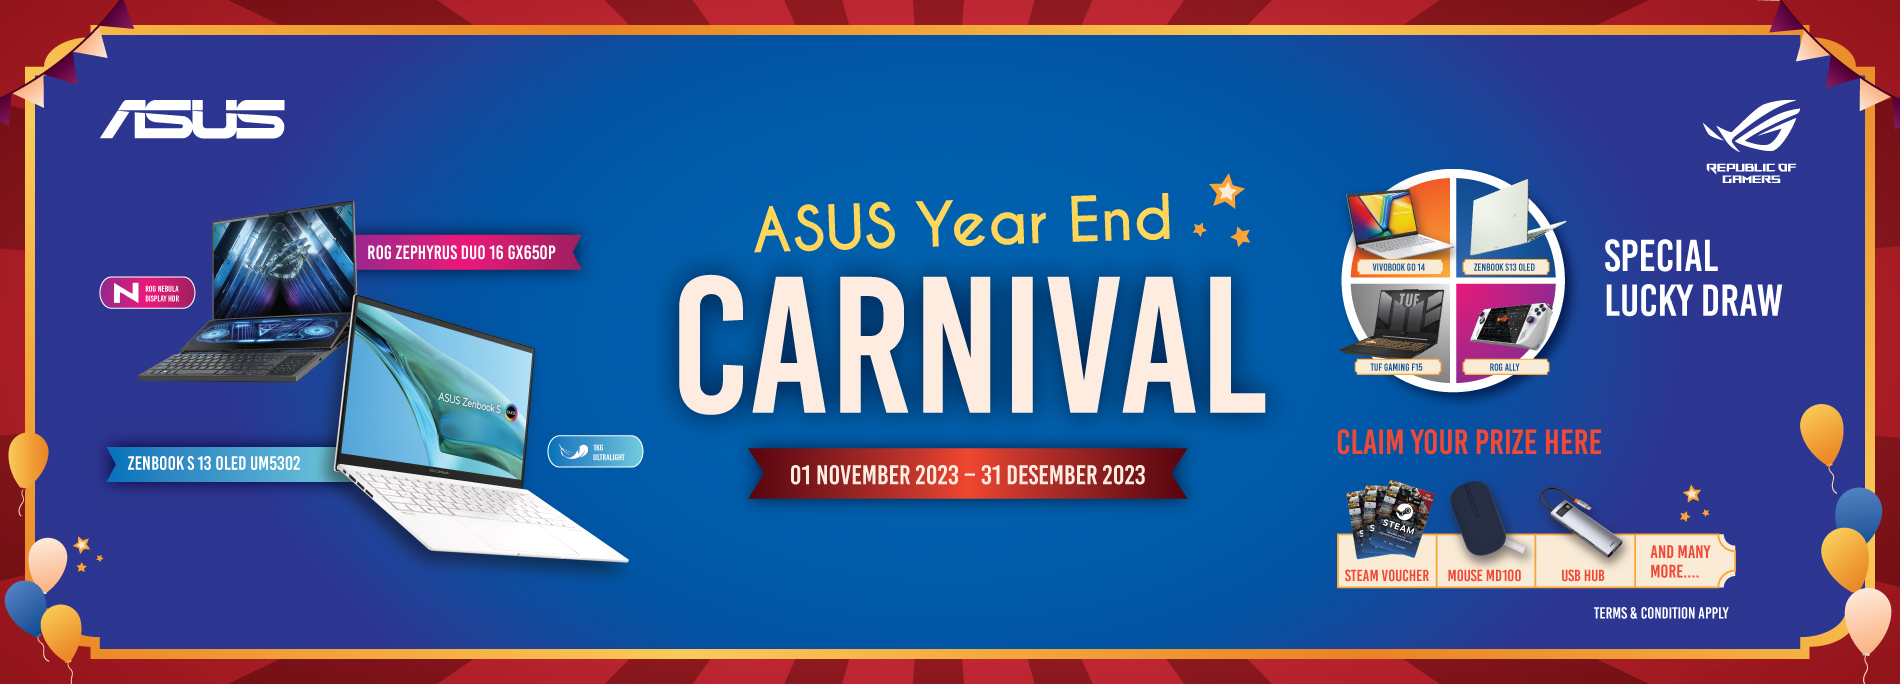 ASUS Year End Carnival